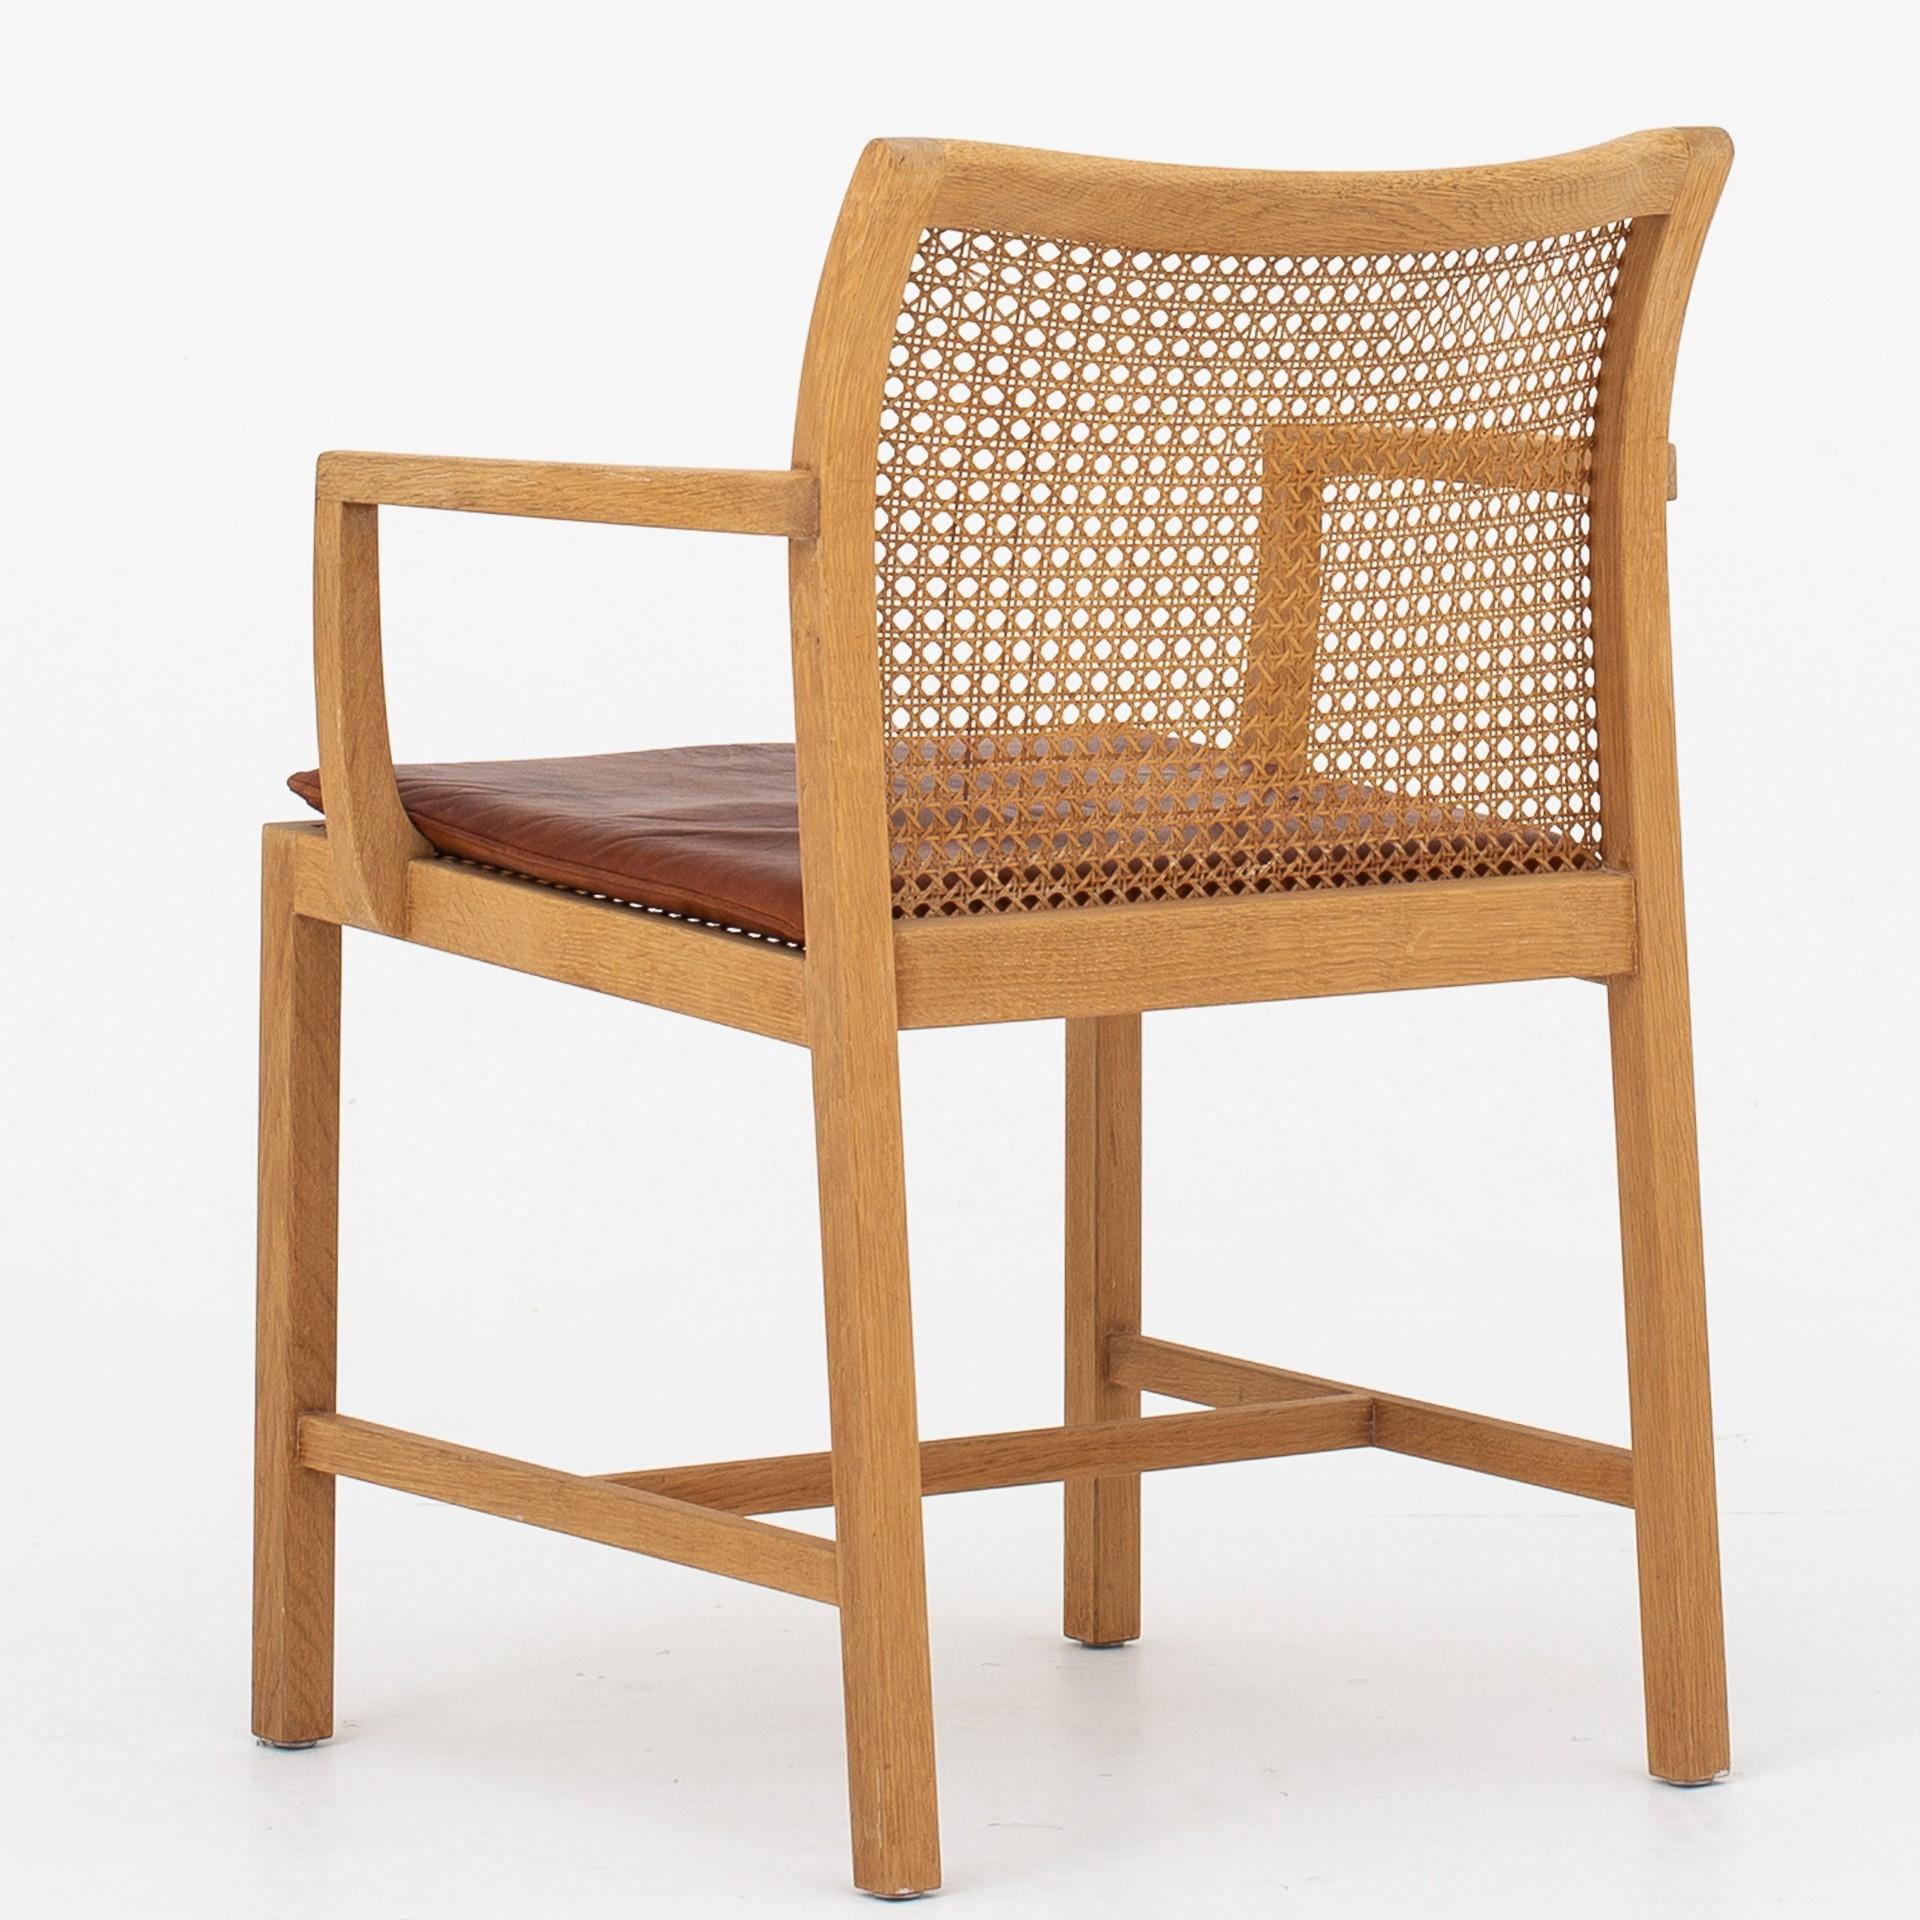 Dining chairs in oak, cane and red leather. Set of 10. Maker Søren Horn.